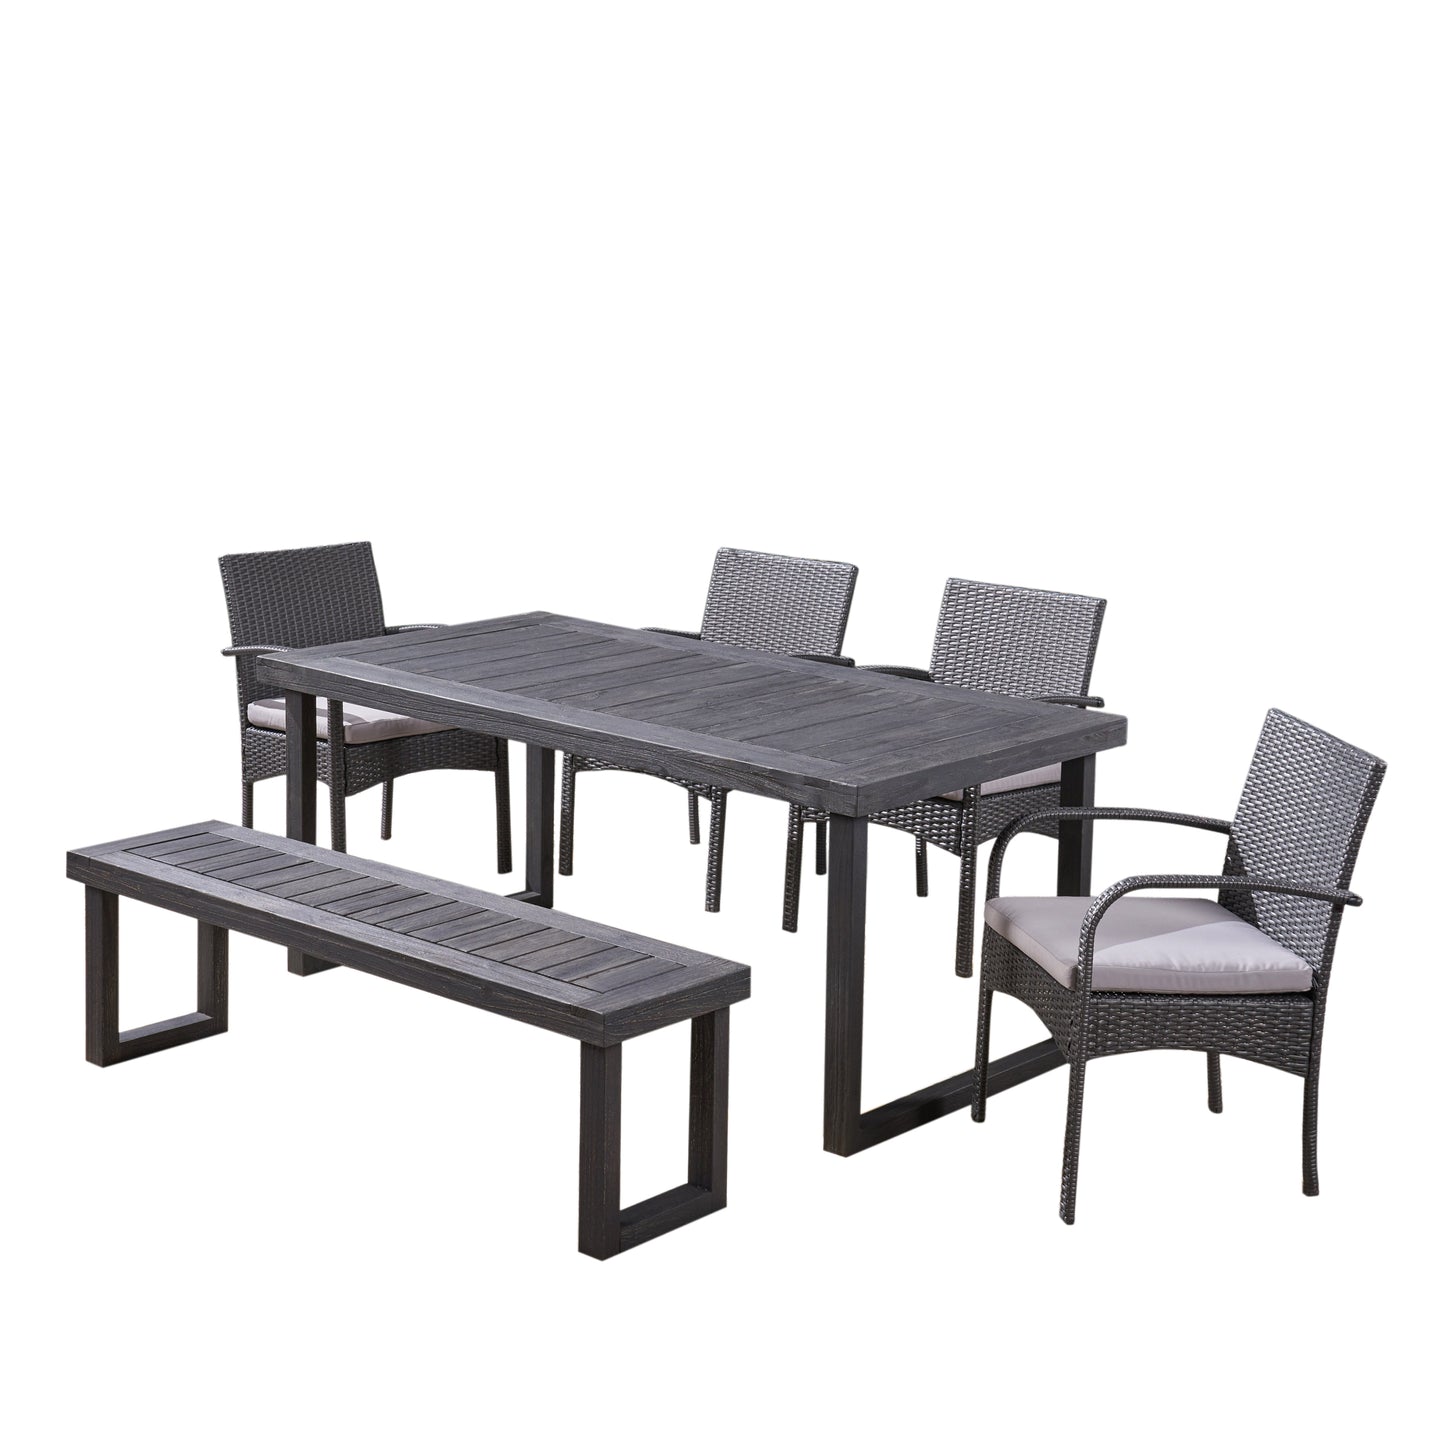 Stonecrest Outdoor 6-Seater Wood and Wicker Chair and Bench Dining Set